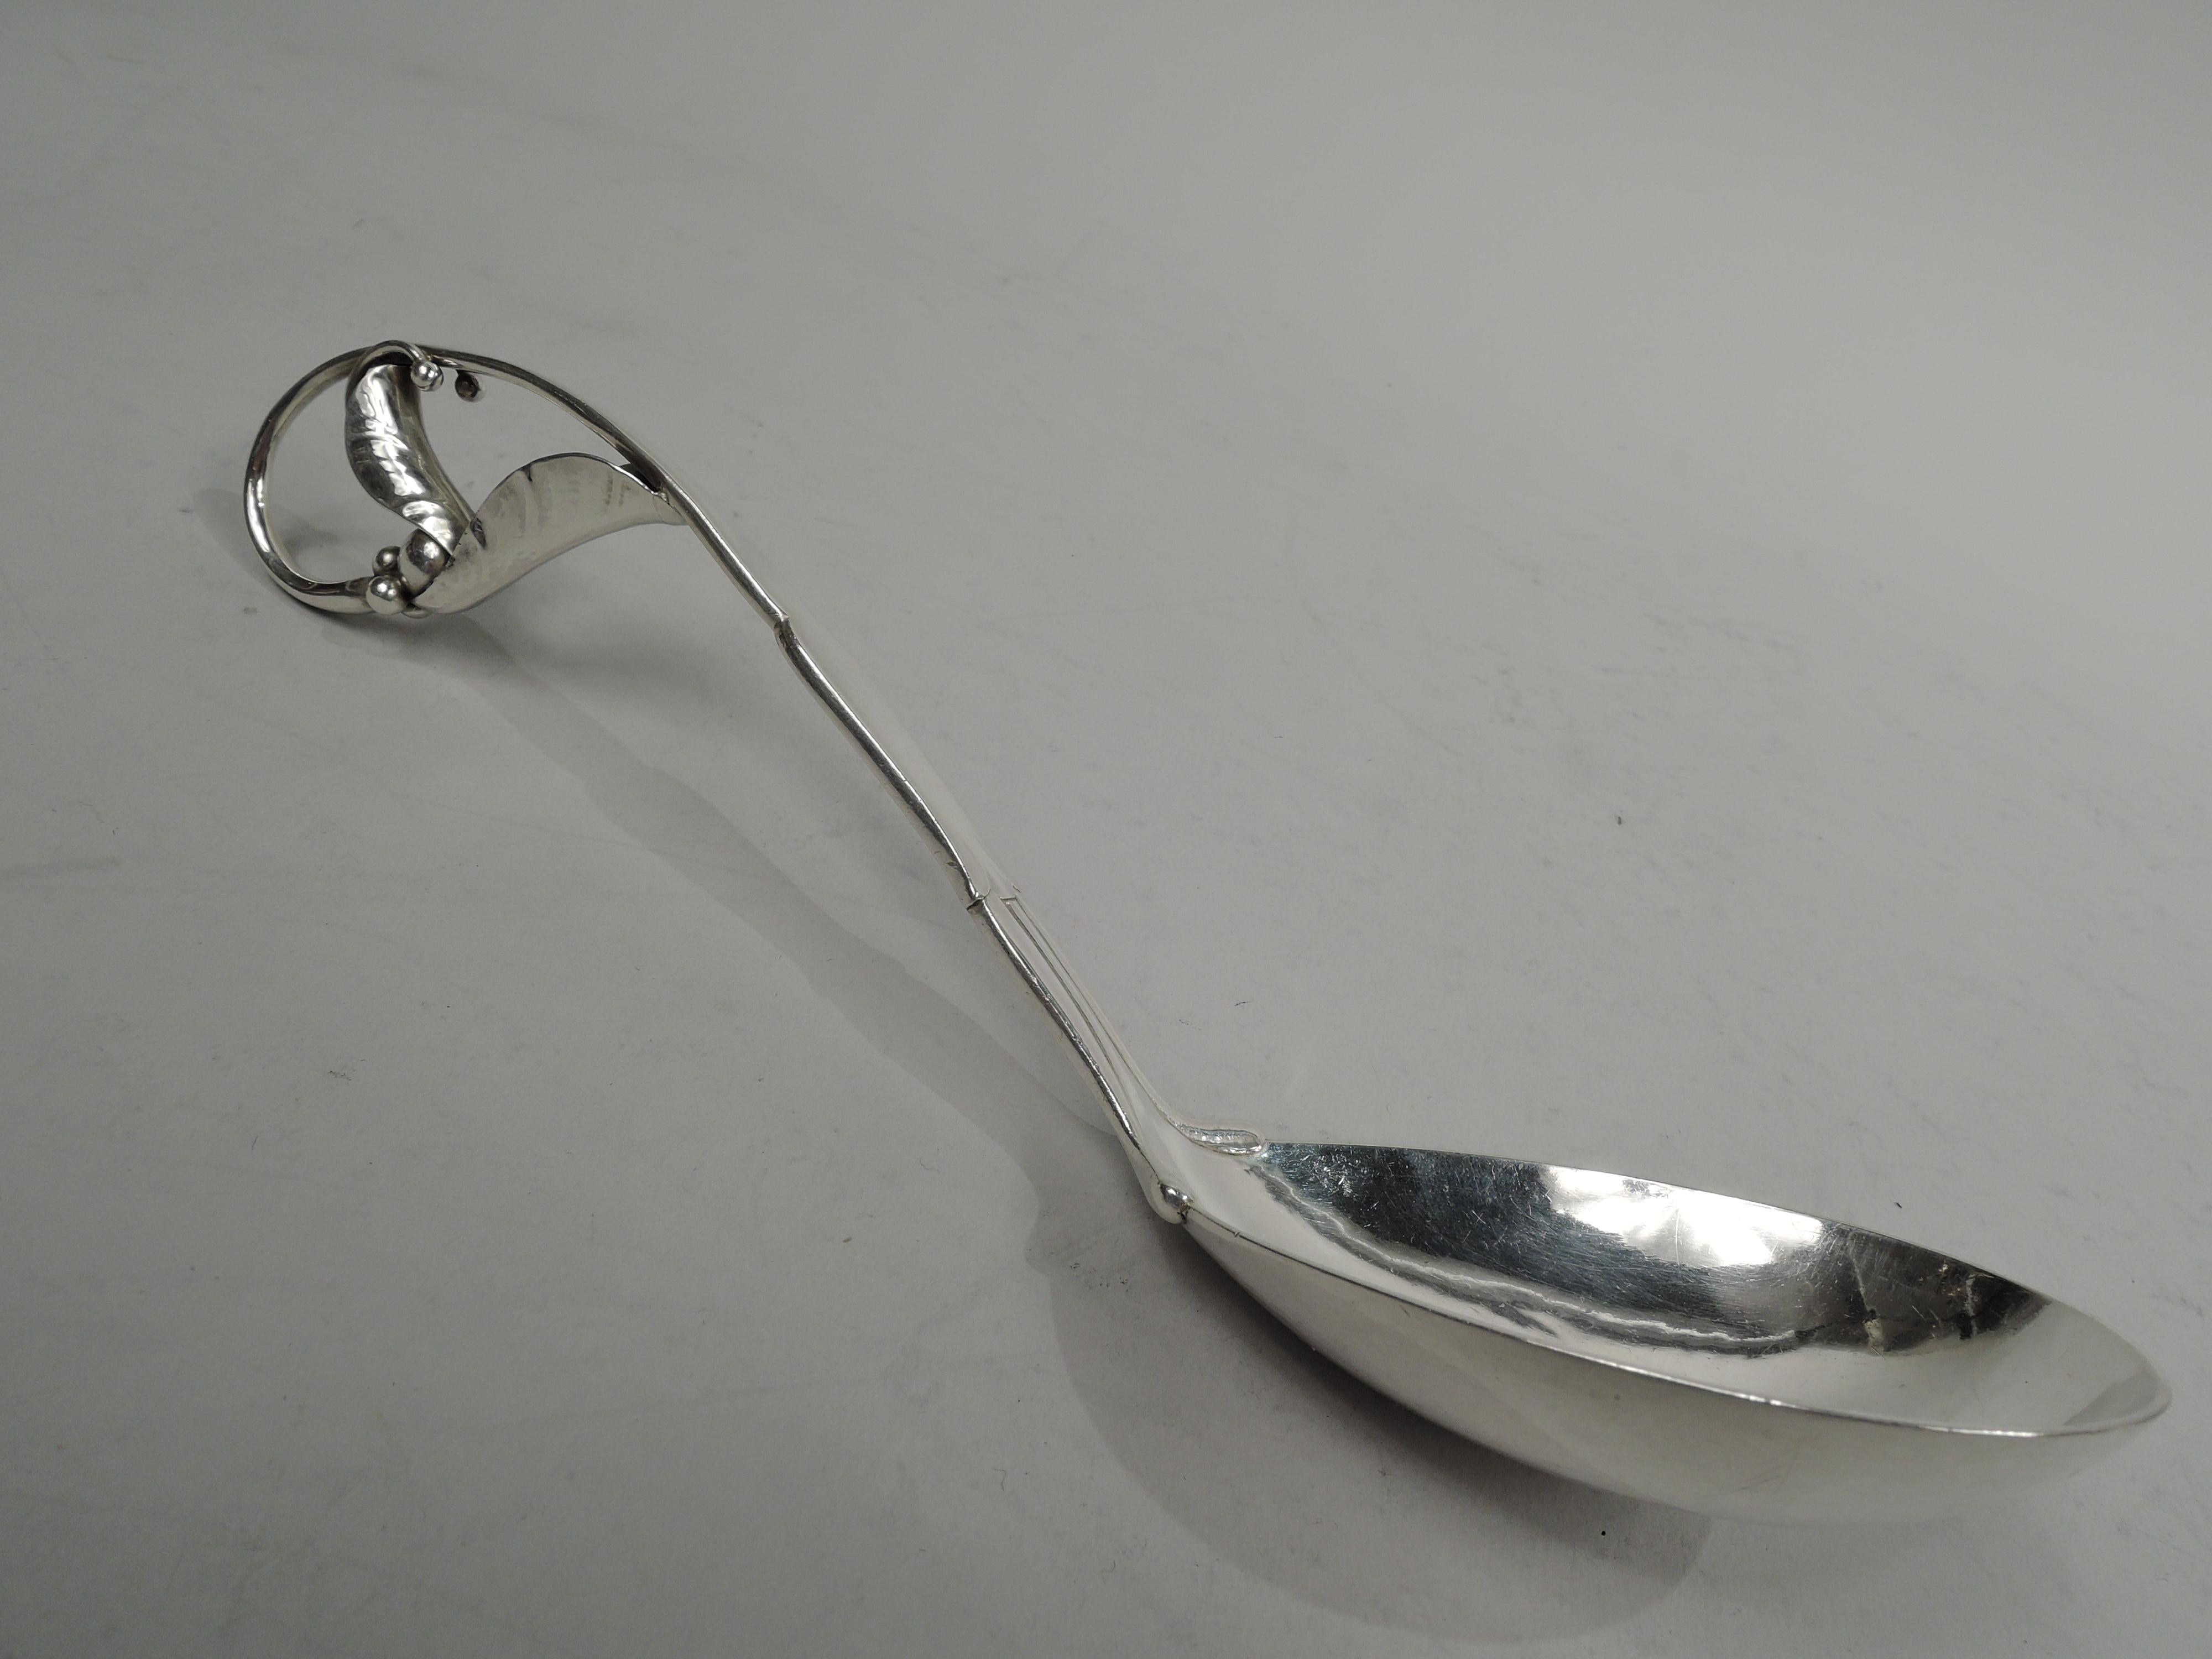 Ornamental 141 sterling silver serving spoon. Made by Georg Jensen in Copenhagen and imported to England in 1930 by George Stockwell. Oval bowl and shaped and tapering handle with turned-under leaf and tendril terminal. Fully marked including